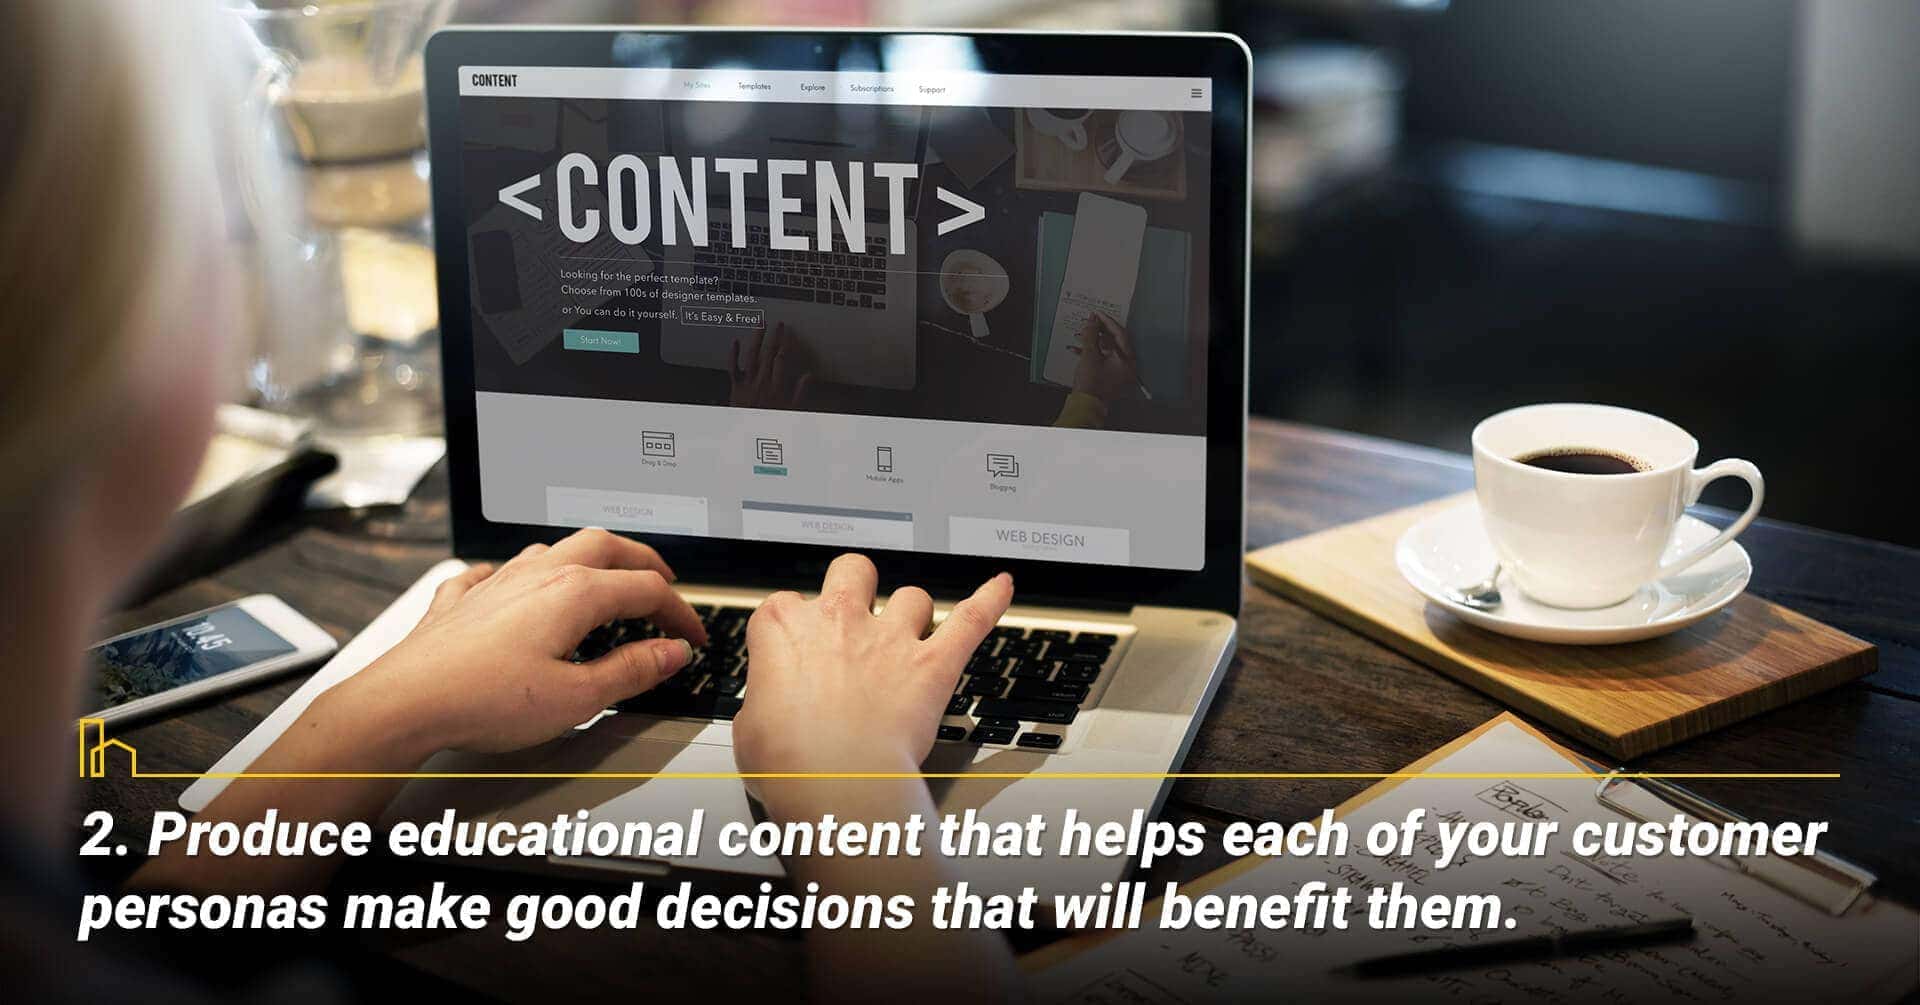 Produce educational content that helps each of your customer personas make good decisions that will benefit them, help your customer make good decisions